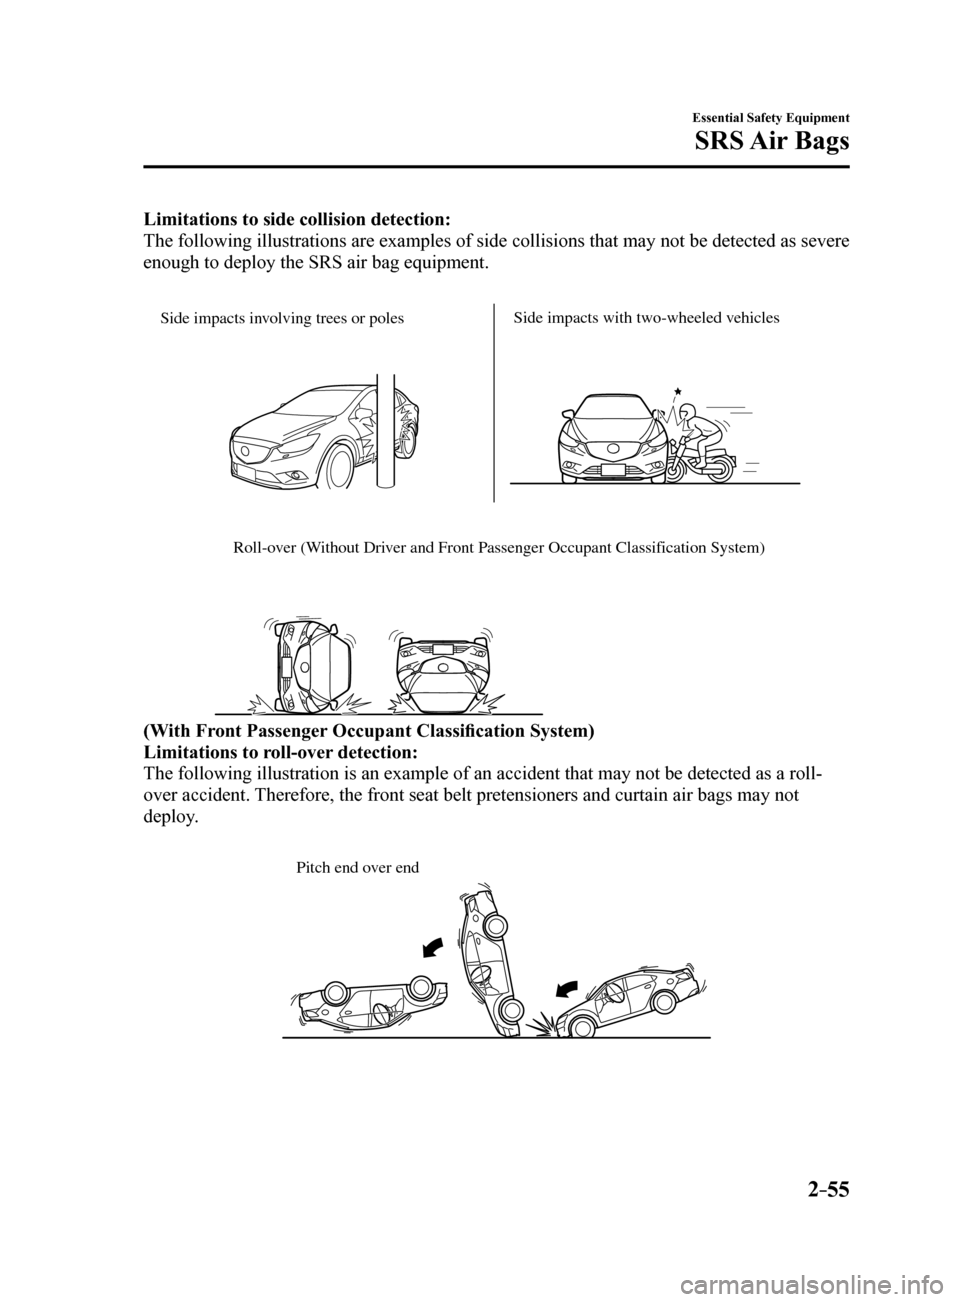 MAZDA MODEL 6 2017  Owners Manual (in English) 2–55
Essential Safety Equipment
SRS Air  Bags
Limitations to side collision detection:
The following illustrations are examples of side collisions that may not\
 be detected as severe 
enough to dep